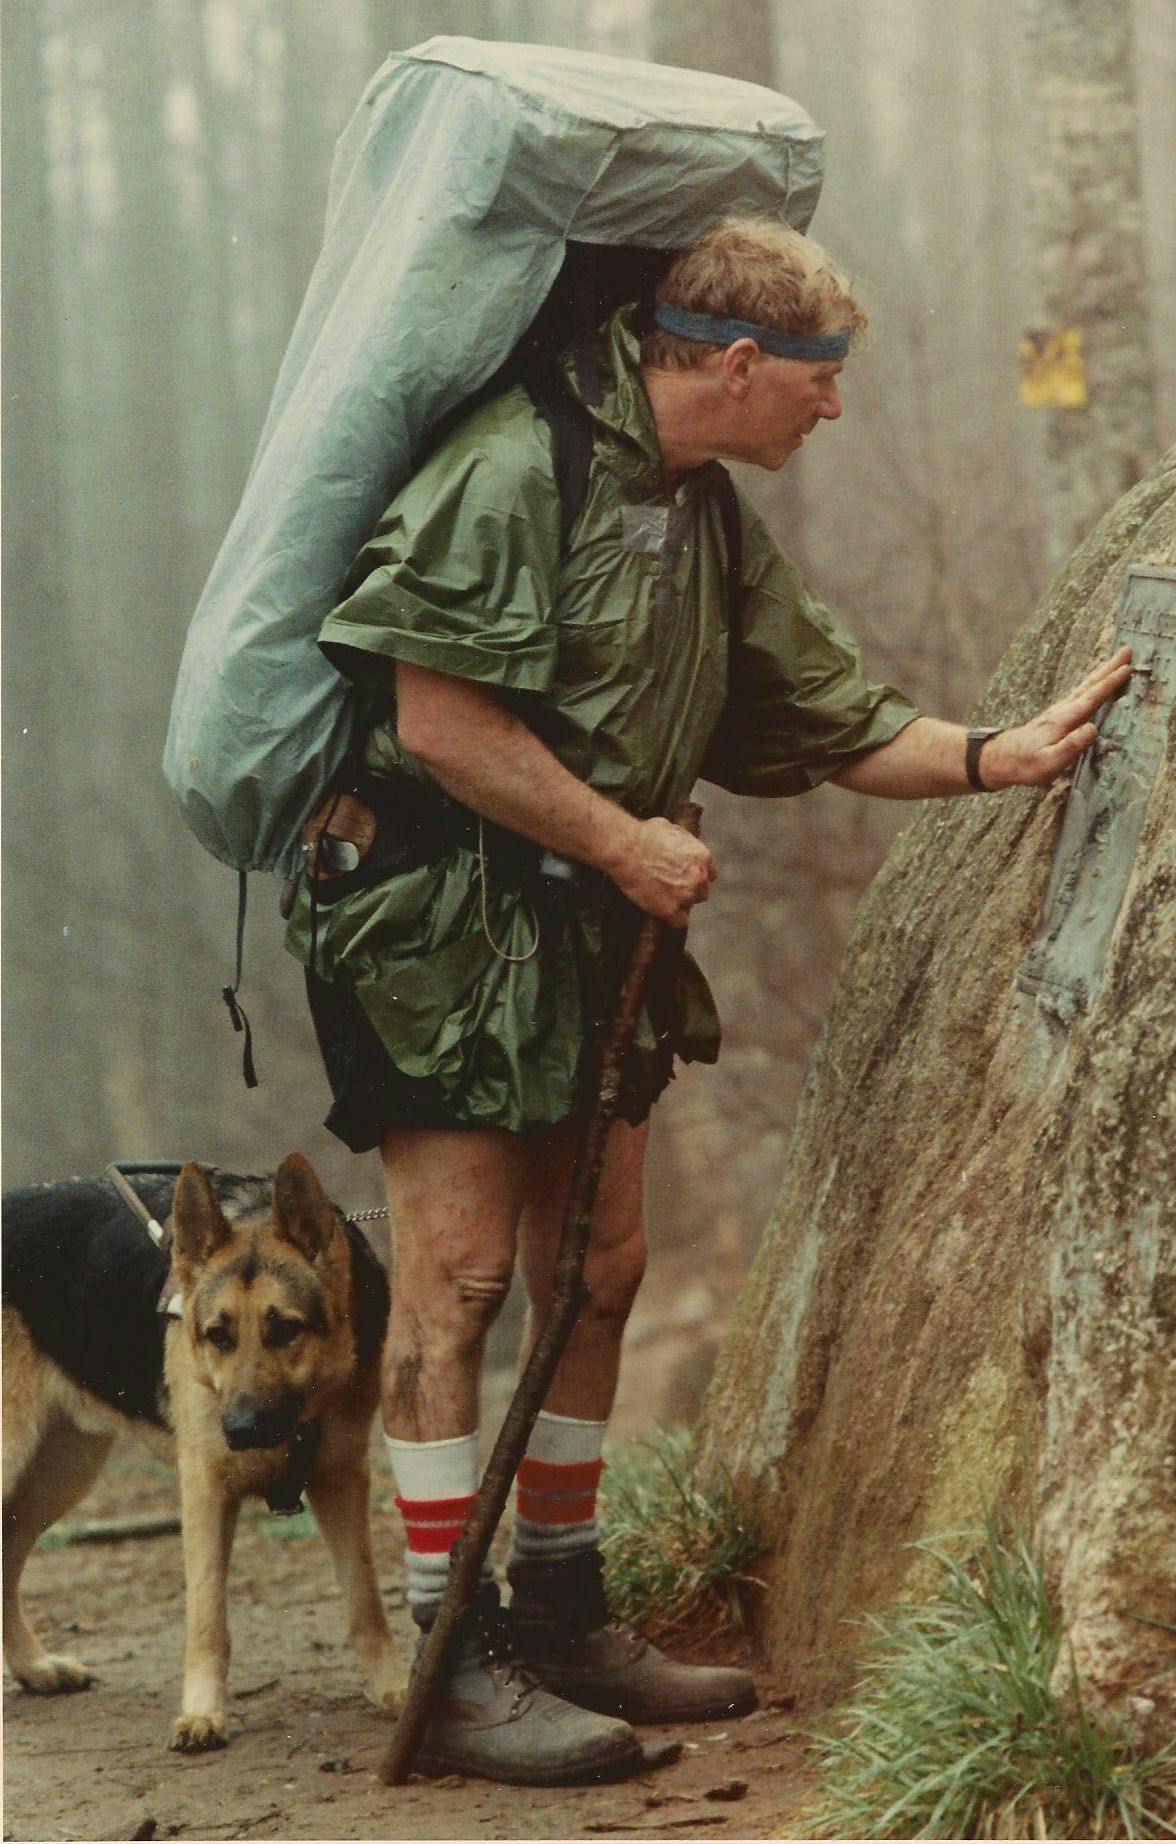 An image of Bill Irwin with his dog, Orient, a German Shepherd. Irwin is wearing hiking gear and carrying a large pack.